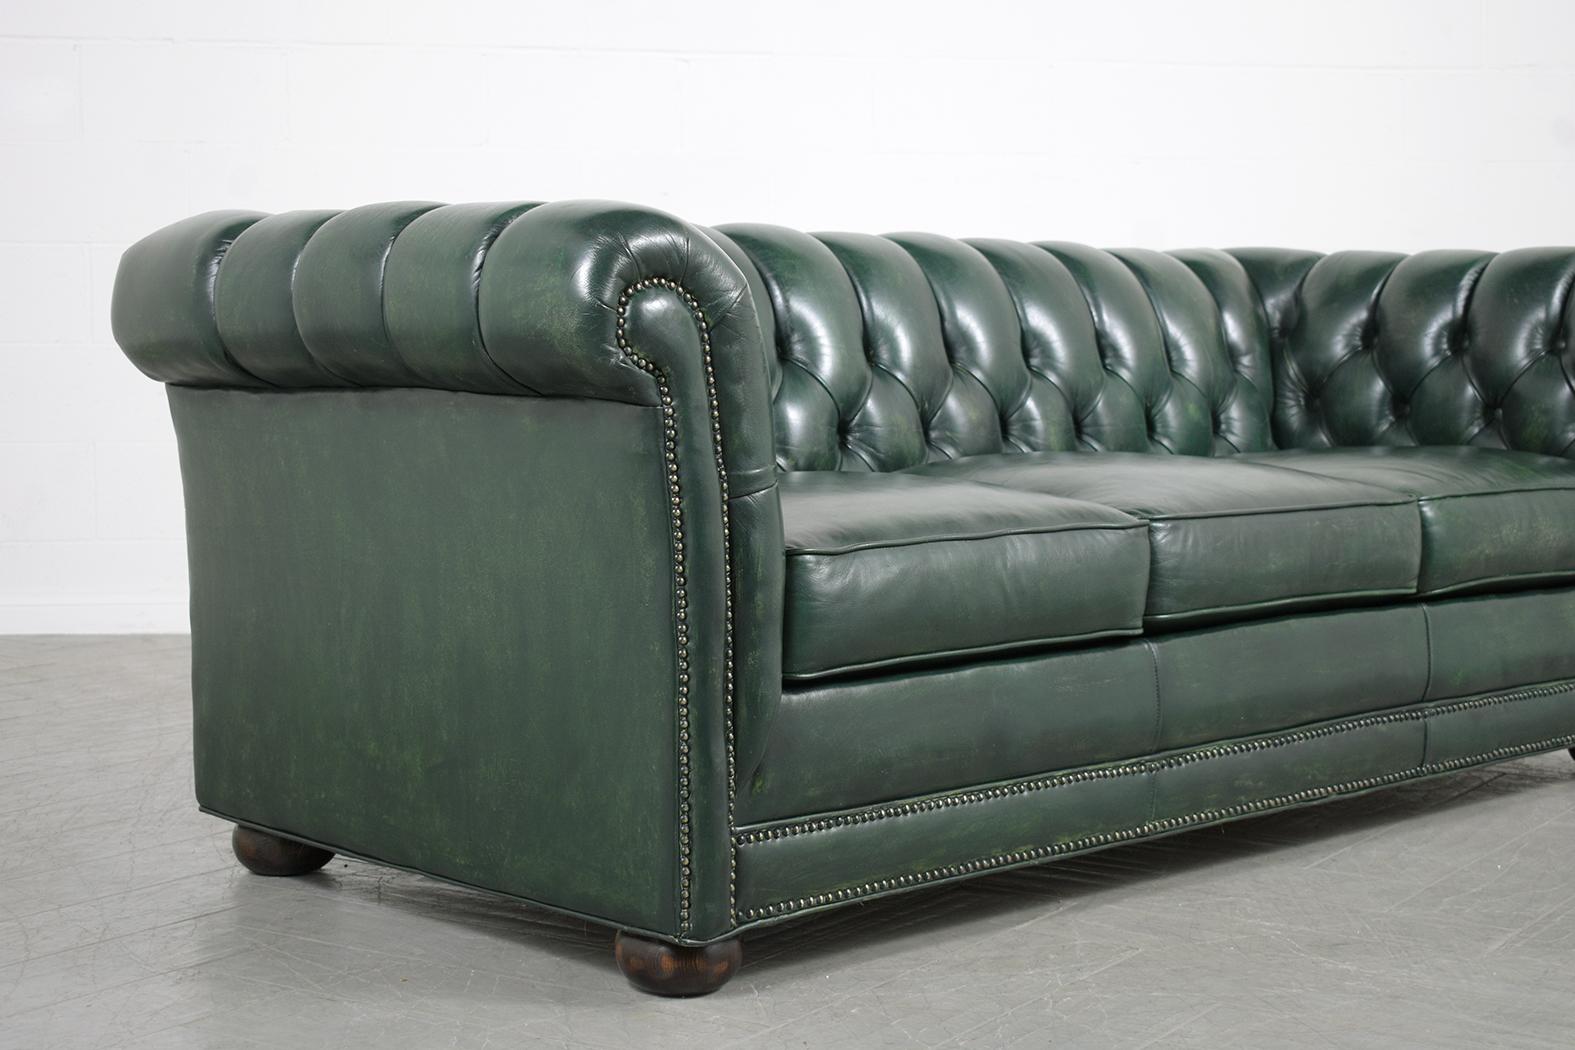 Lacquer Vintage Chesterfield Leather Sofa